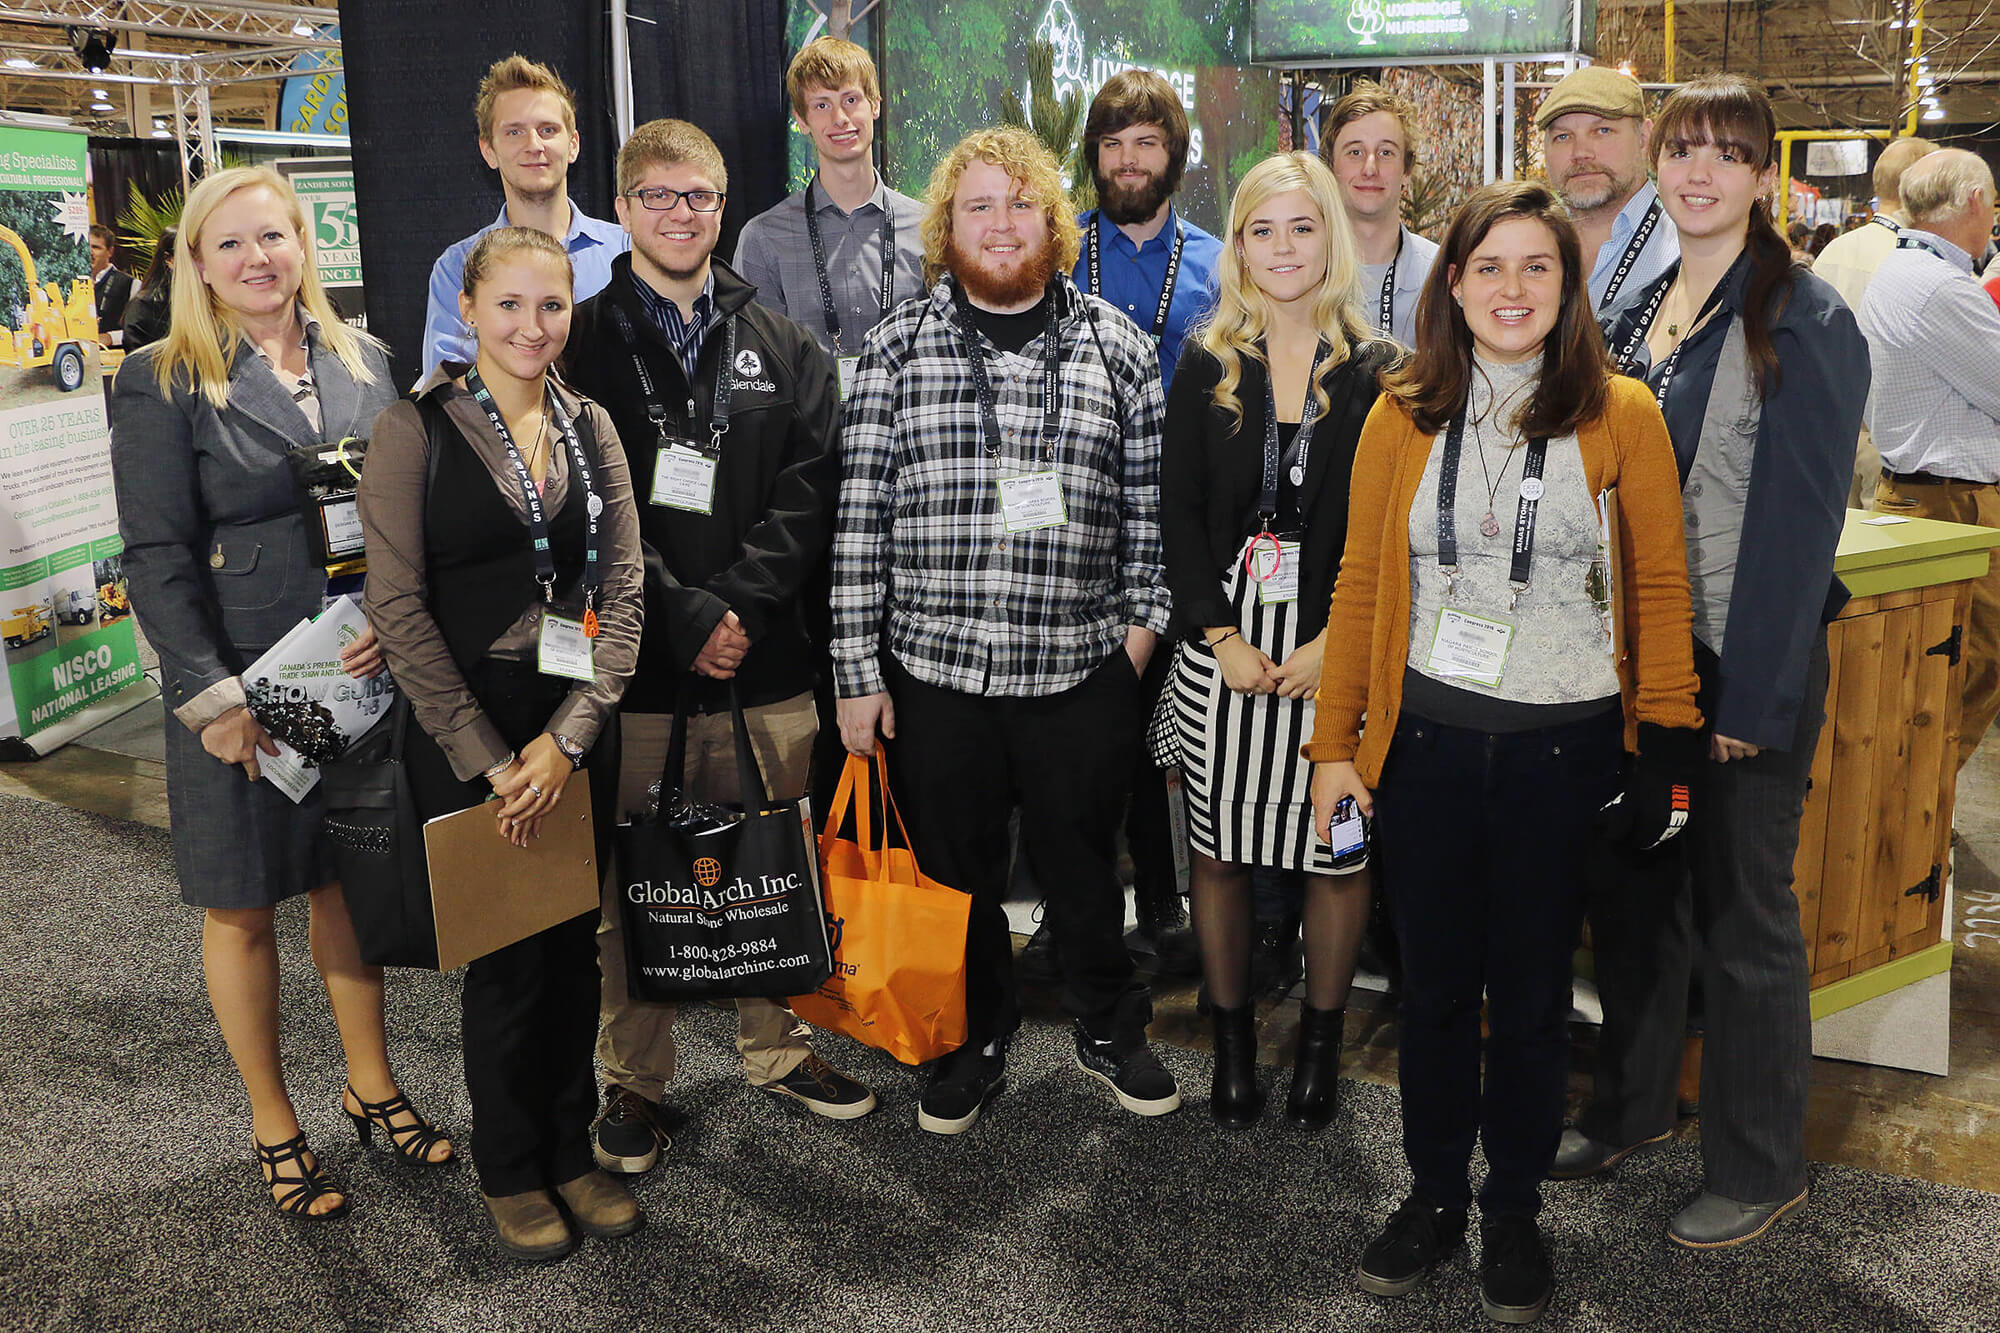 class of students at a trade show